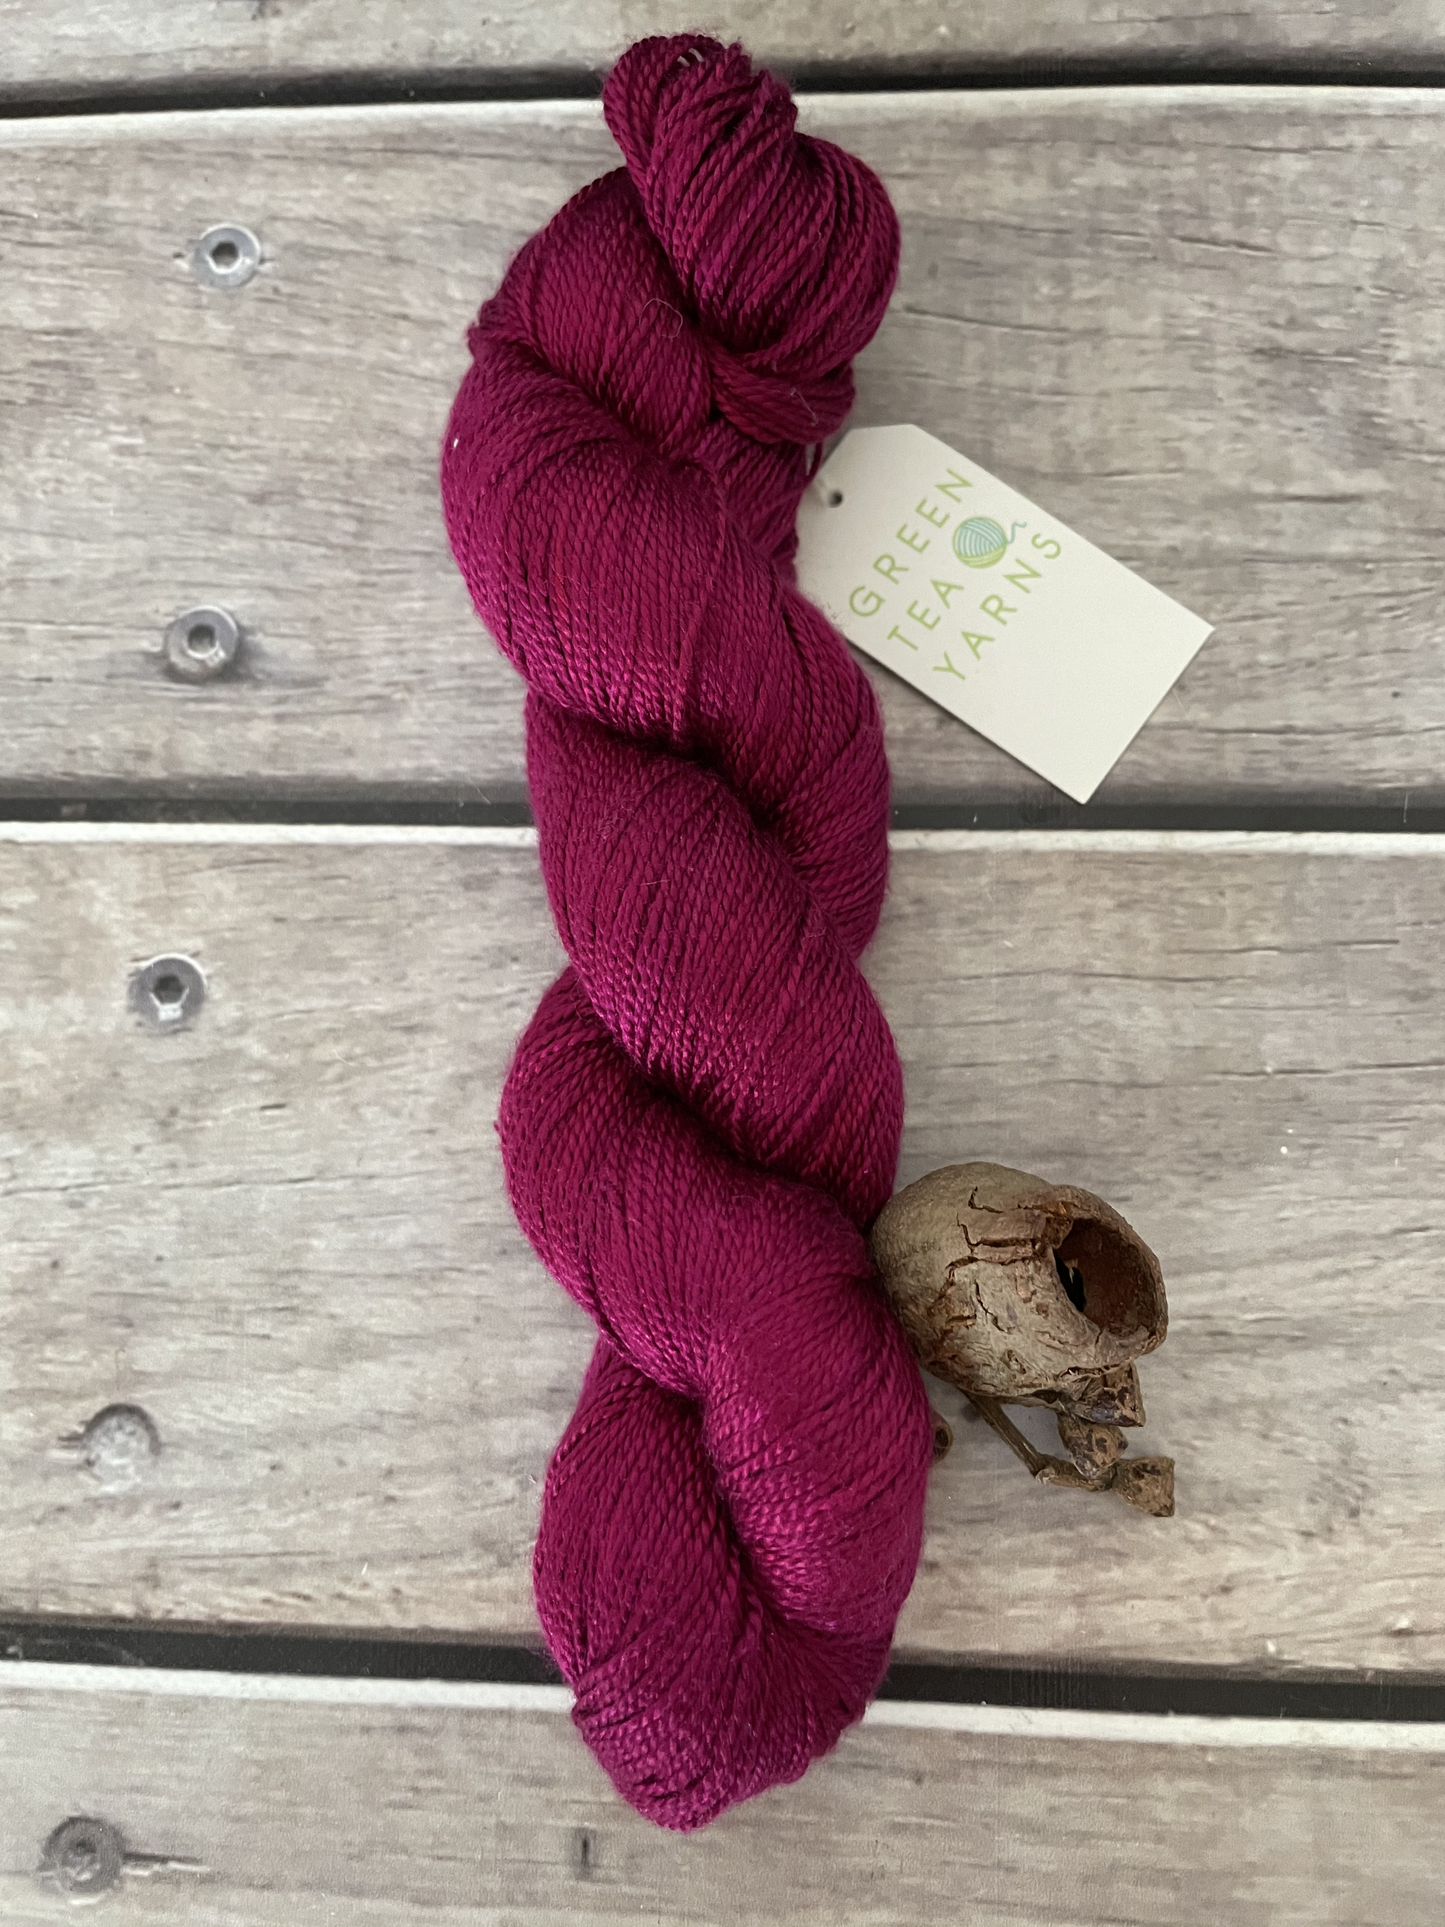 Not Wild Orchid - 4 ply in Mulberry silk - Ginseng